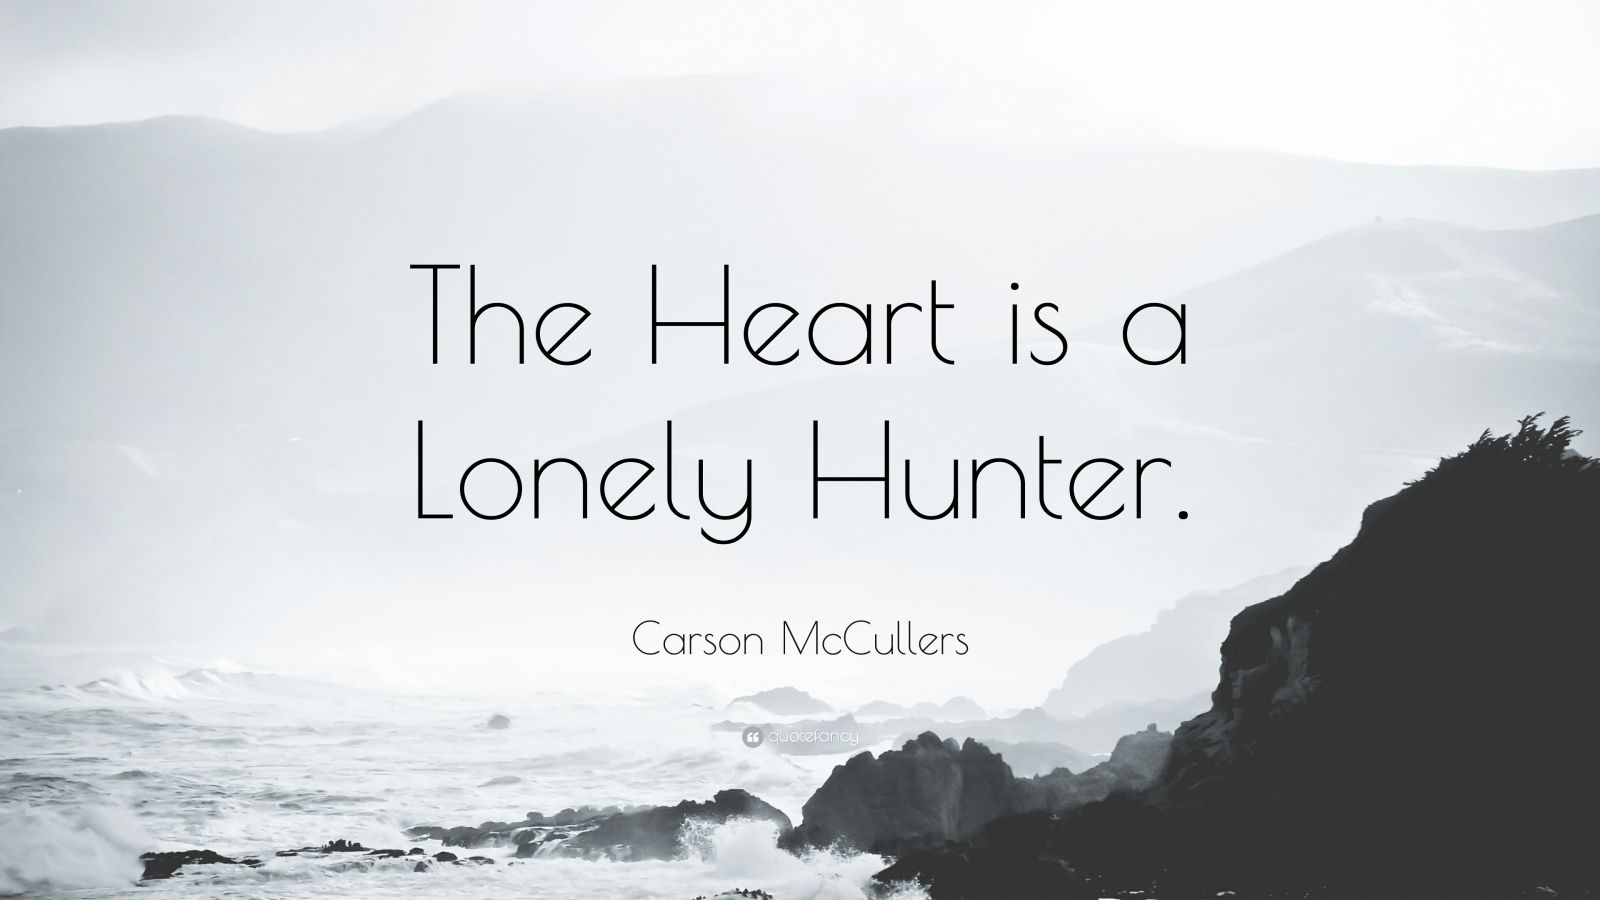 Essay on the heart is a lonely hunter